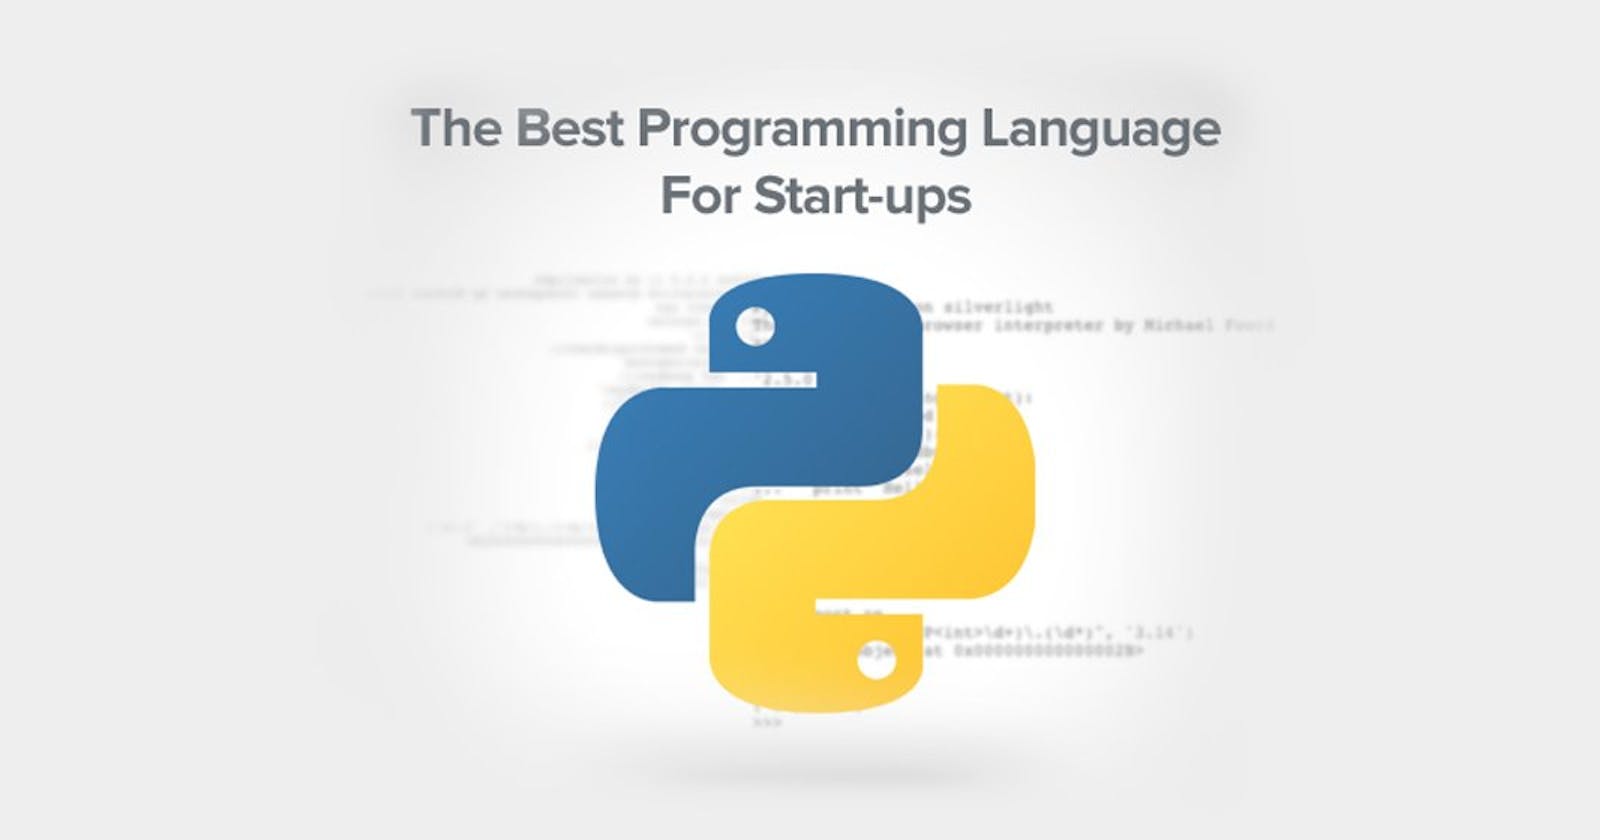 Why Python is the Best Programming Language for Startups